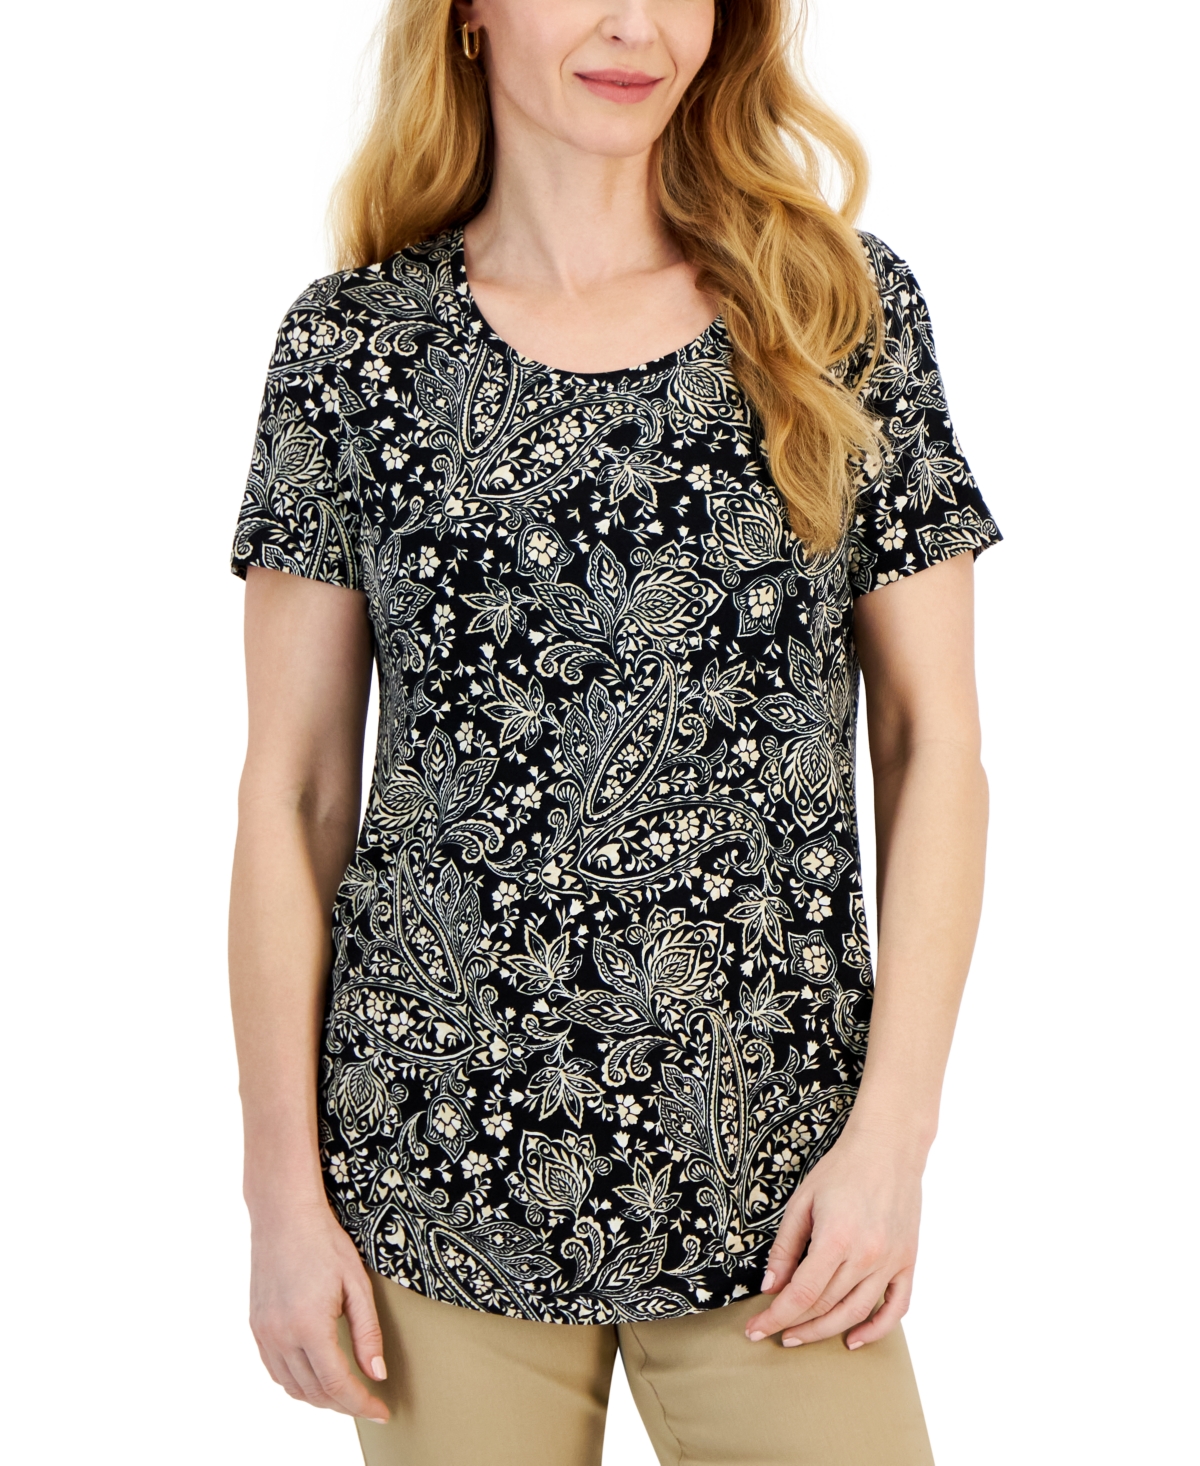 Women's Short Sleeve Printed Knit Top, Created for Macy's - Deep Black Combo